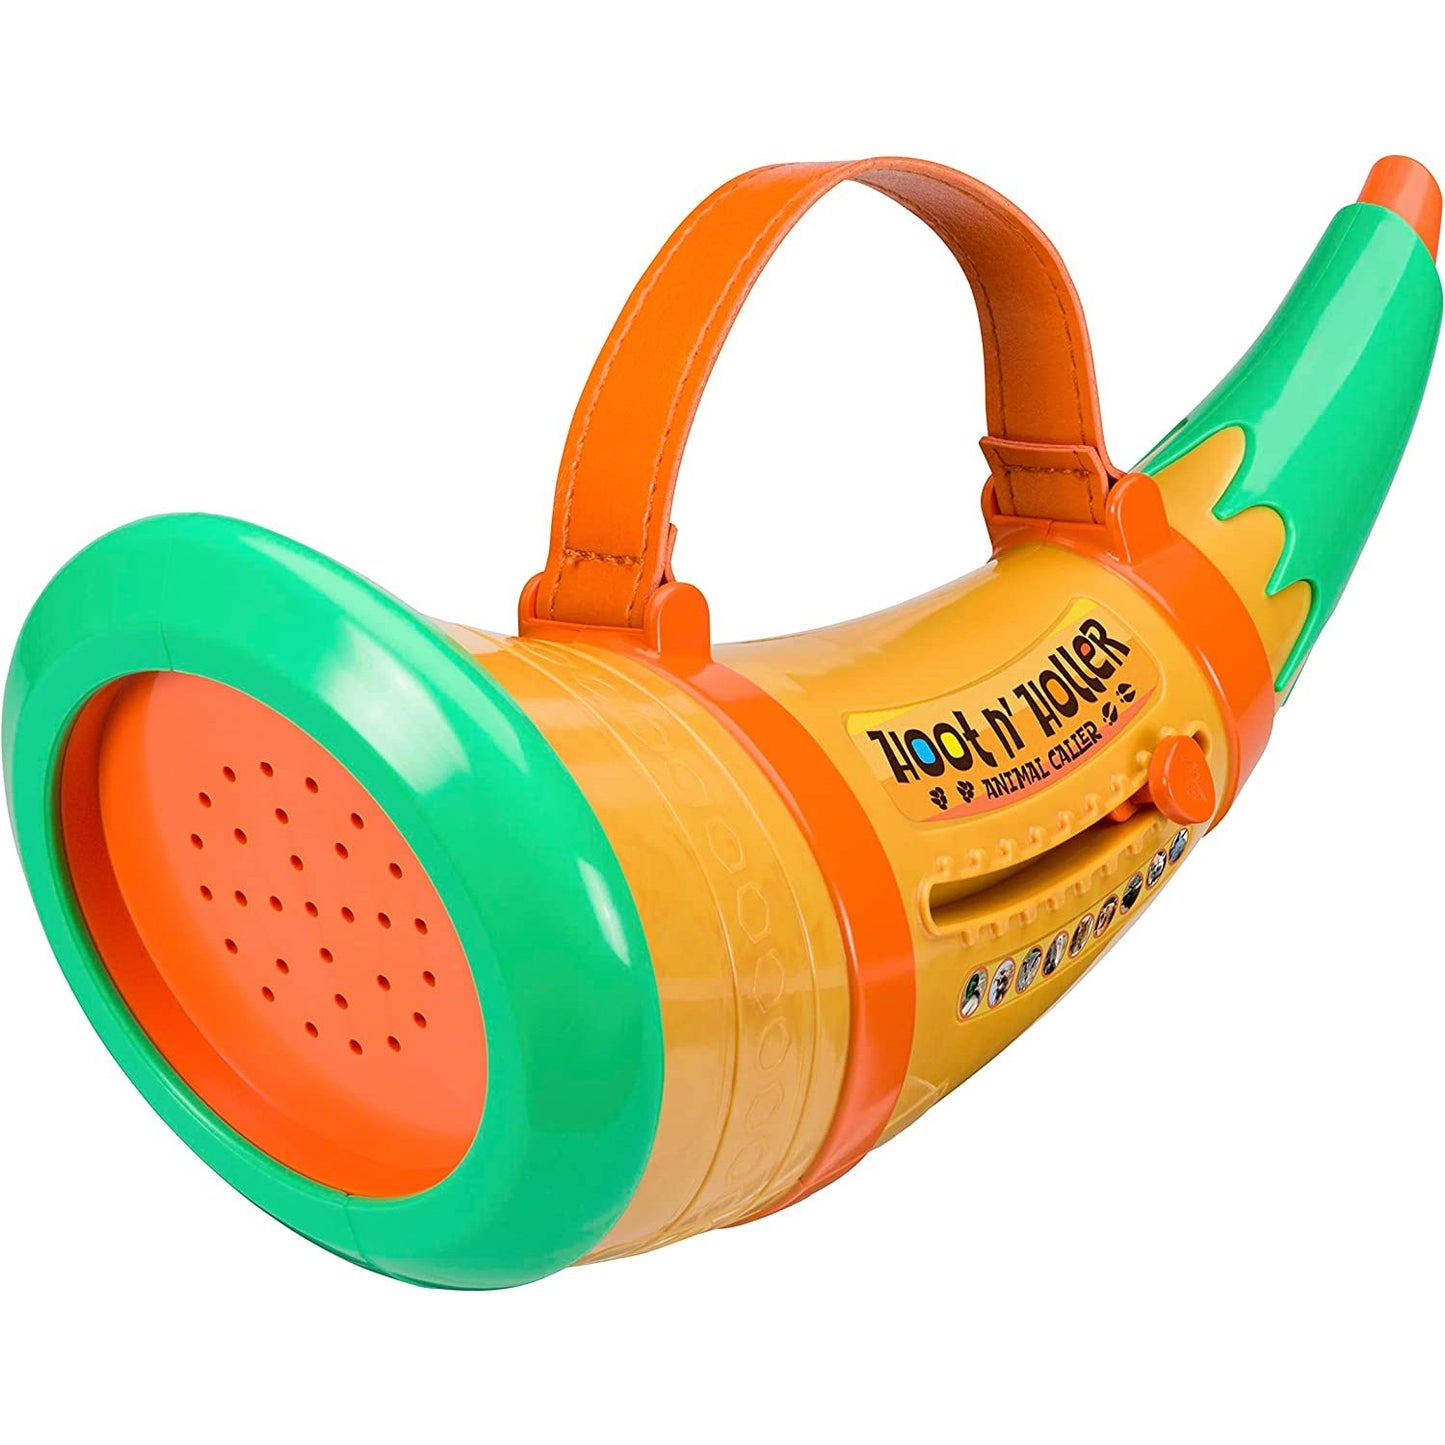 A kids hoot n' holler animal caller toy which makes realistic animal sounds.